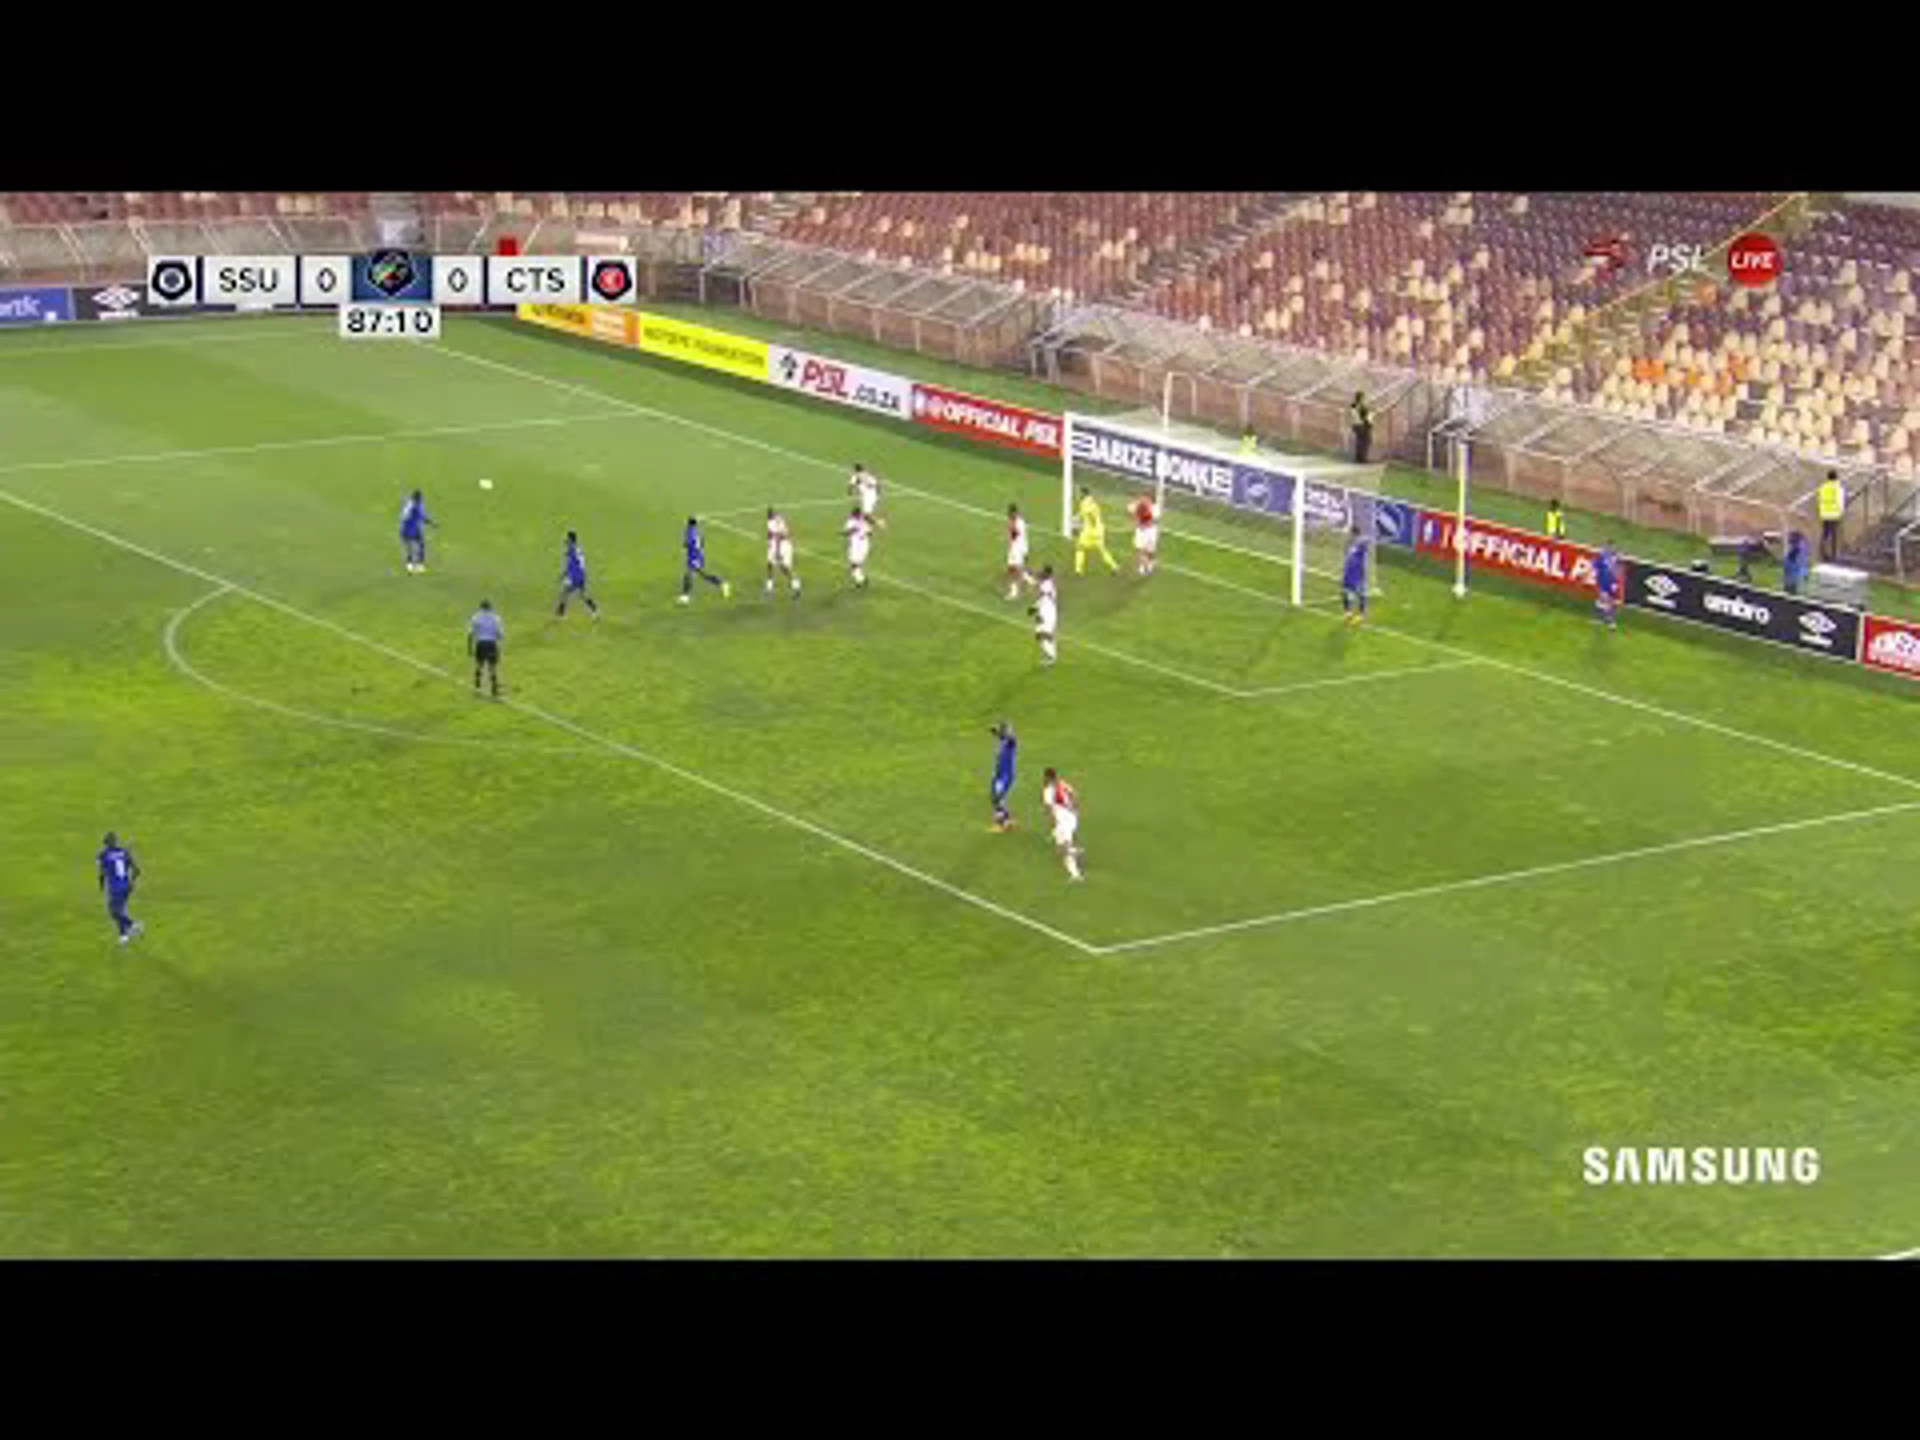 Katlego Maphathe with a Spectacular Defensive Act vs. SuperSport United